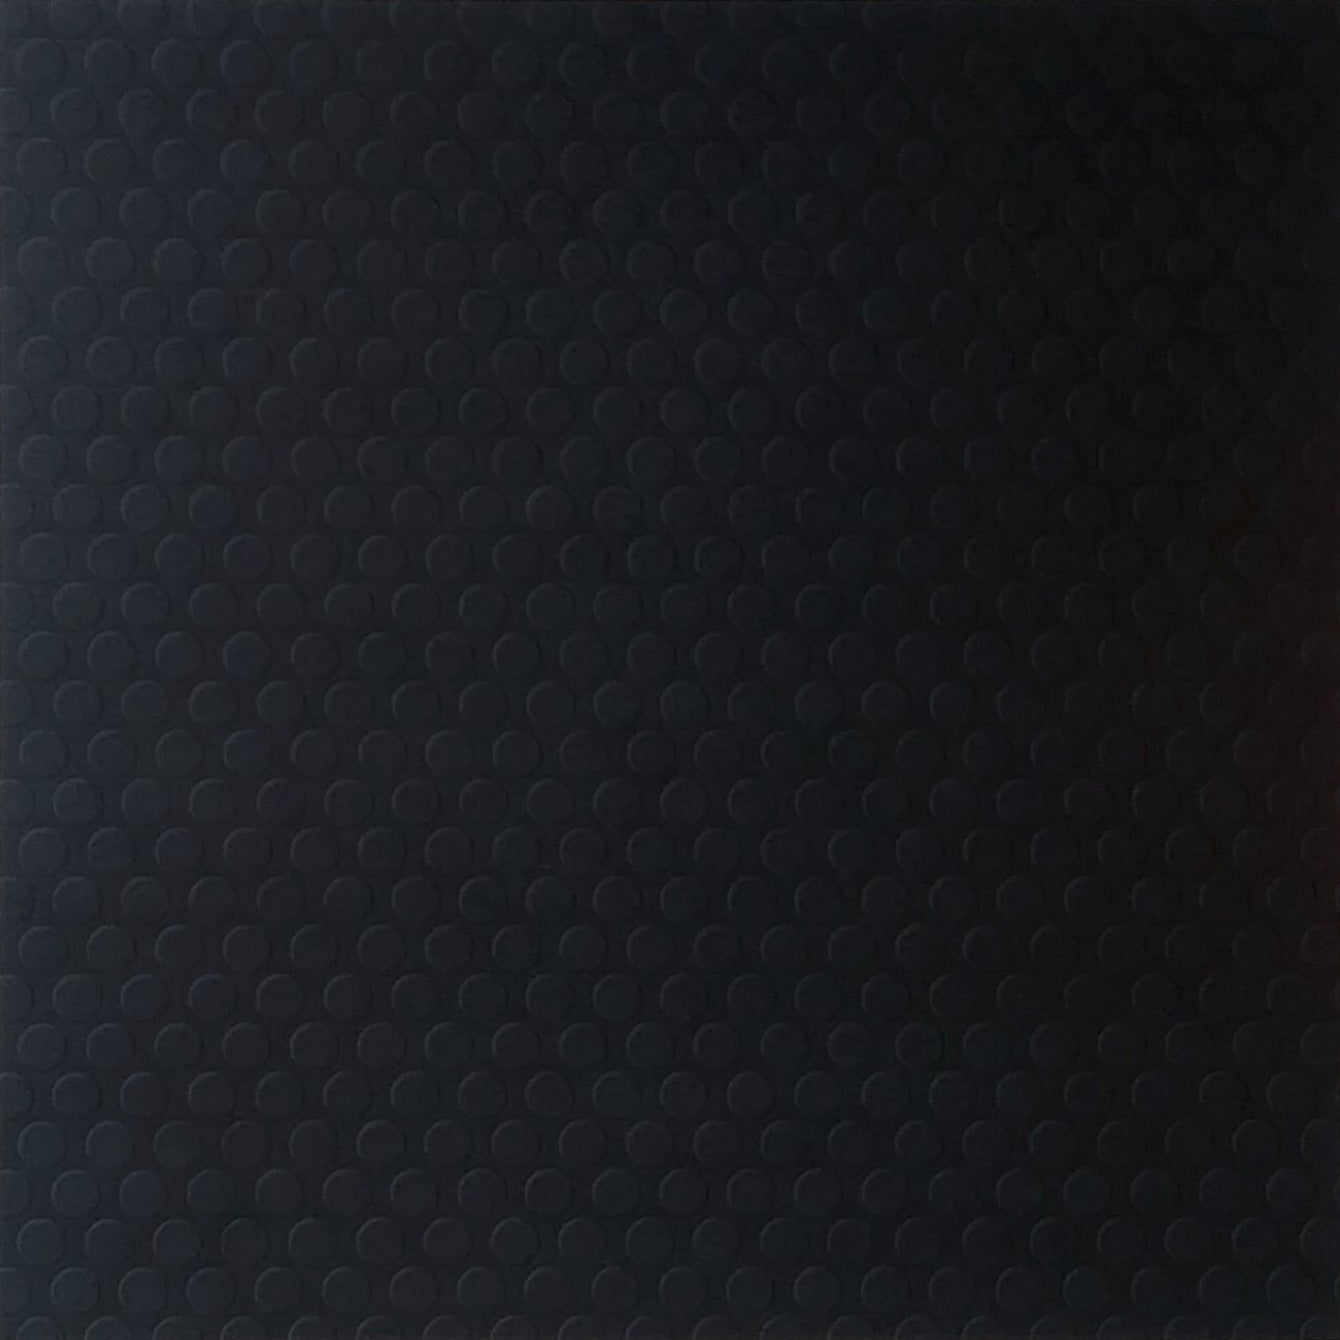 Black Embossed Dots - 12x12 Cardstock - Recollections Single